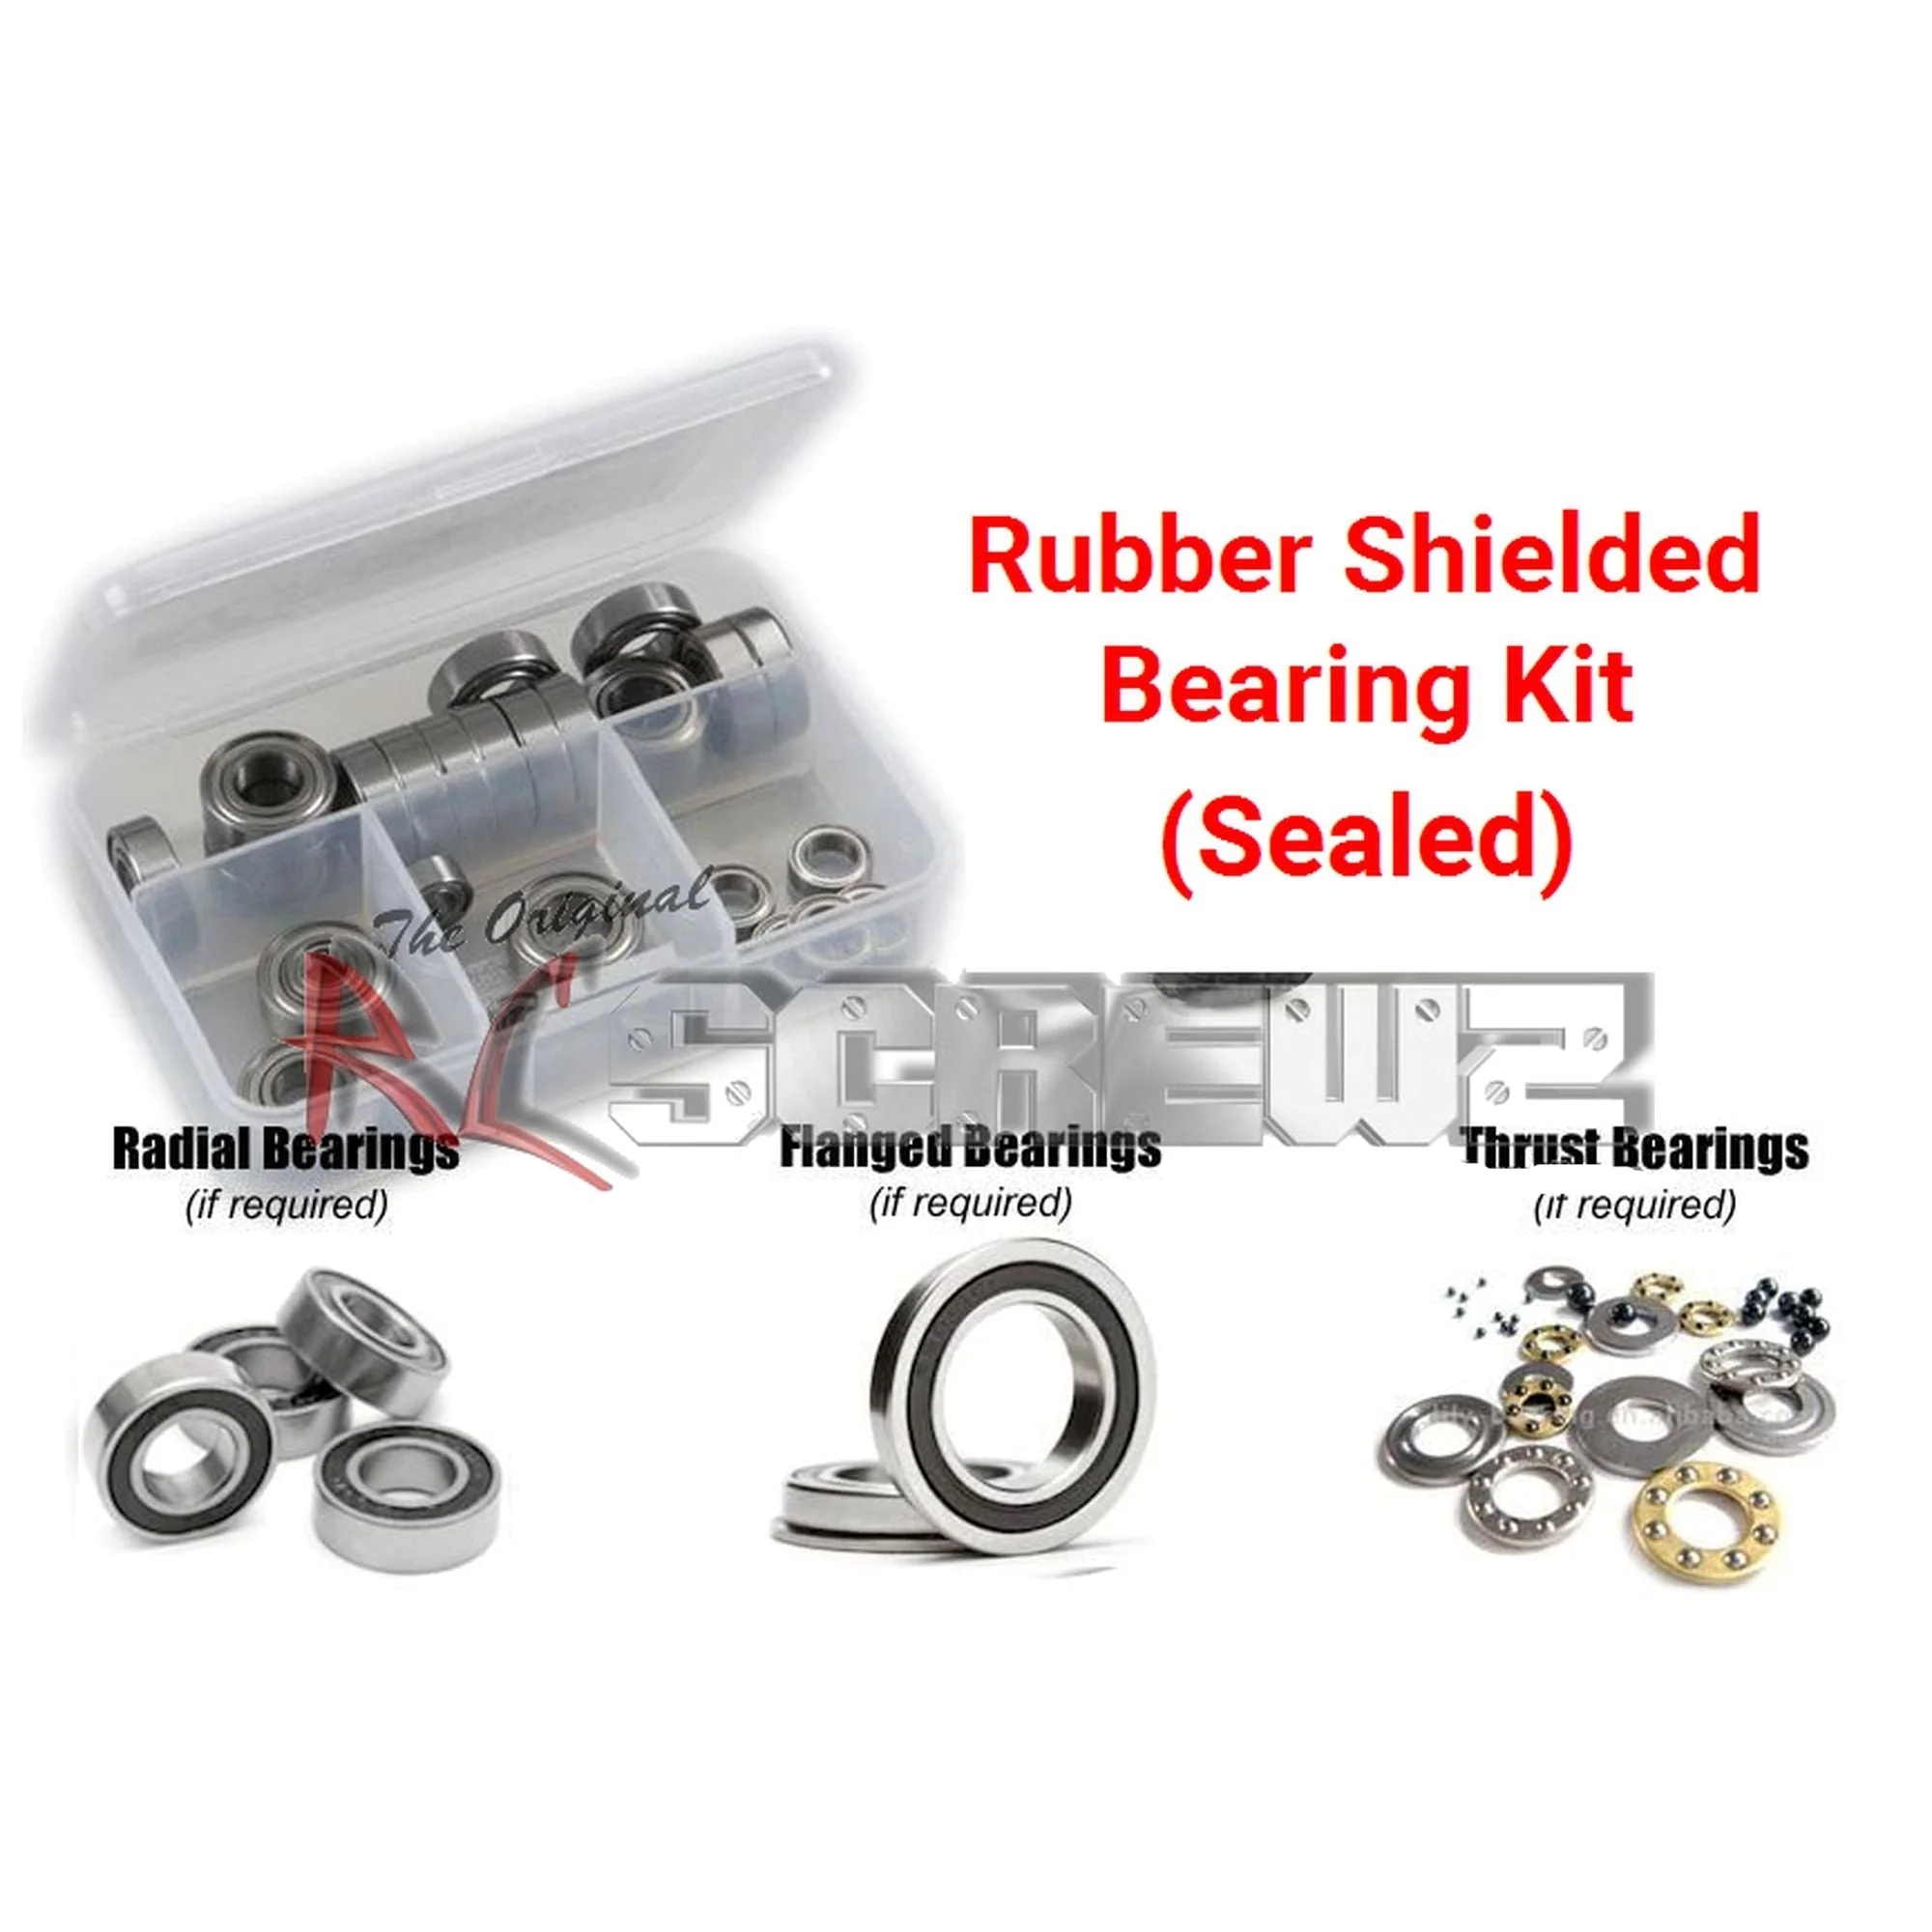 RCScrewZ Rubber Shielded Bearing Kit ass022r for Associated 18B - Picture 1 of 12